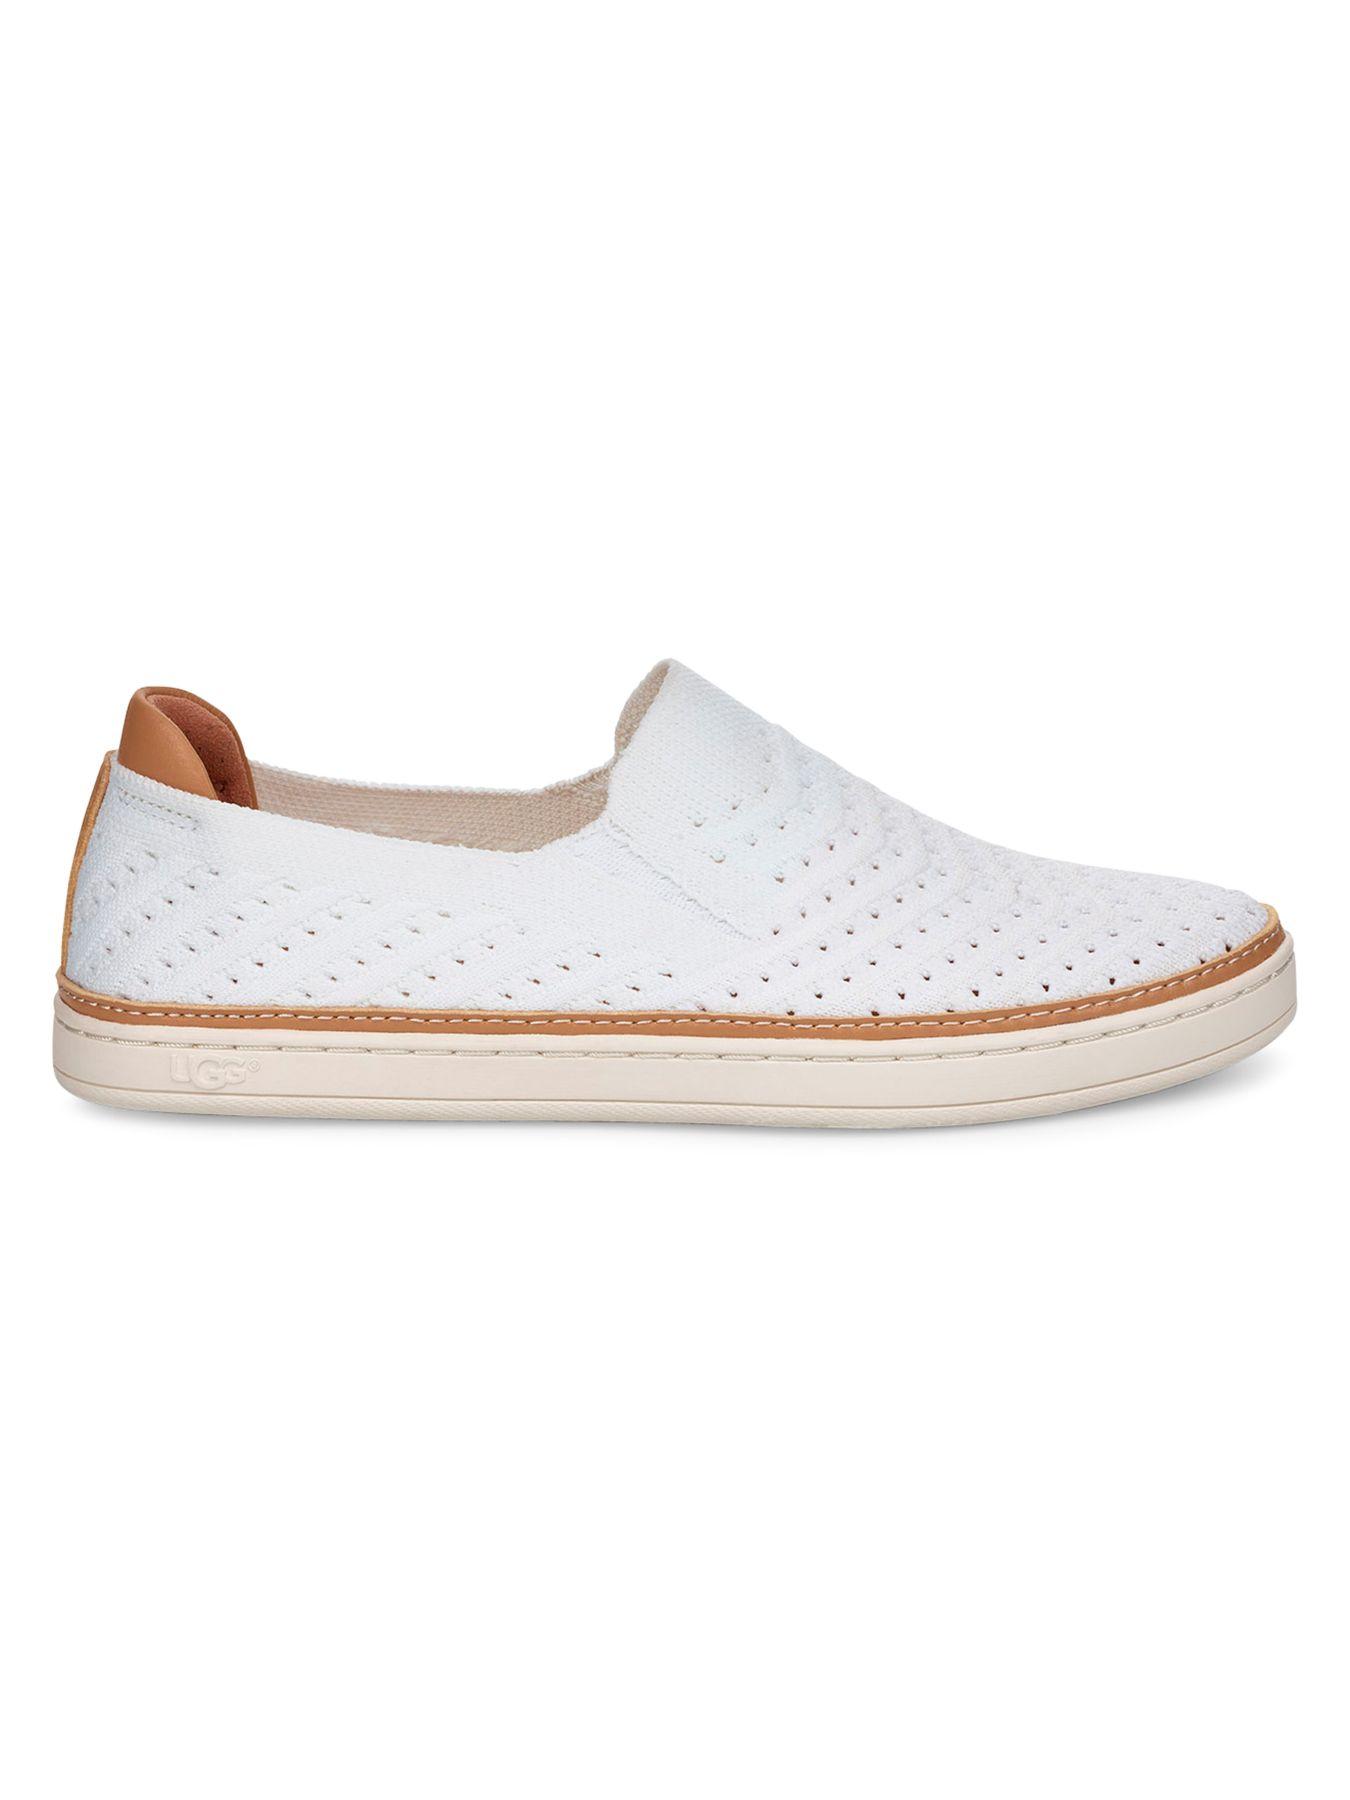 UGG Synthetic Sammy Slip-on Knit Sneakers in White - Lyst